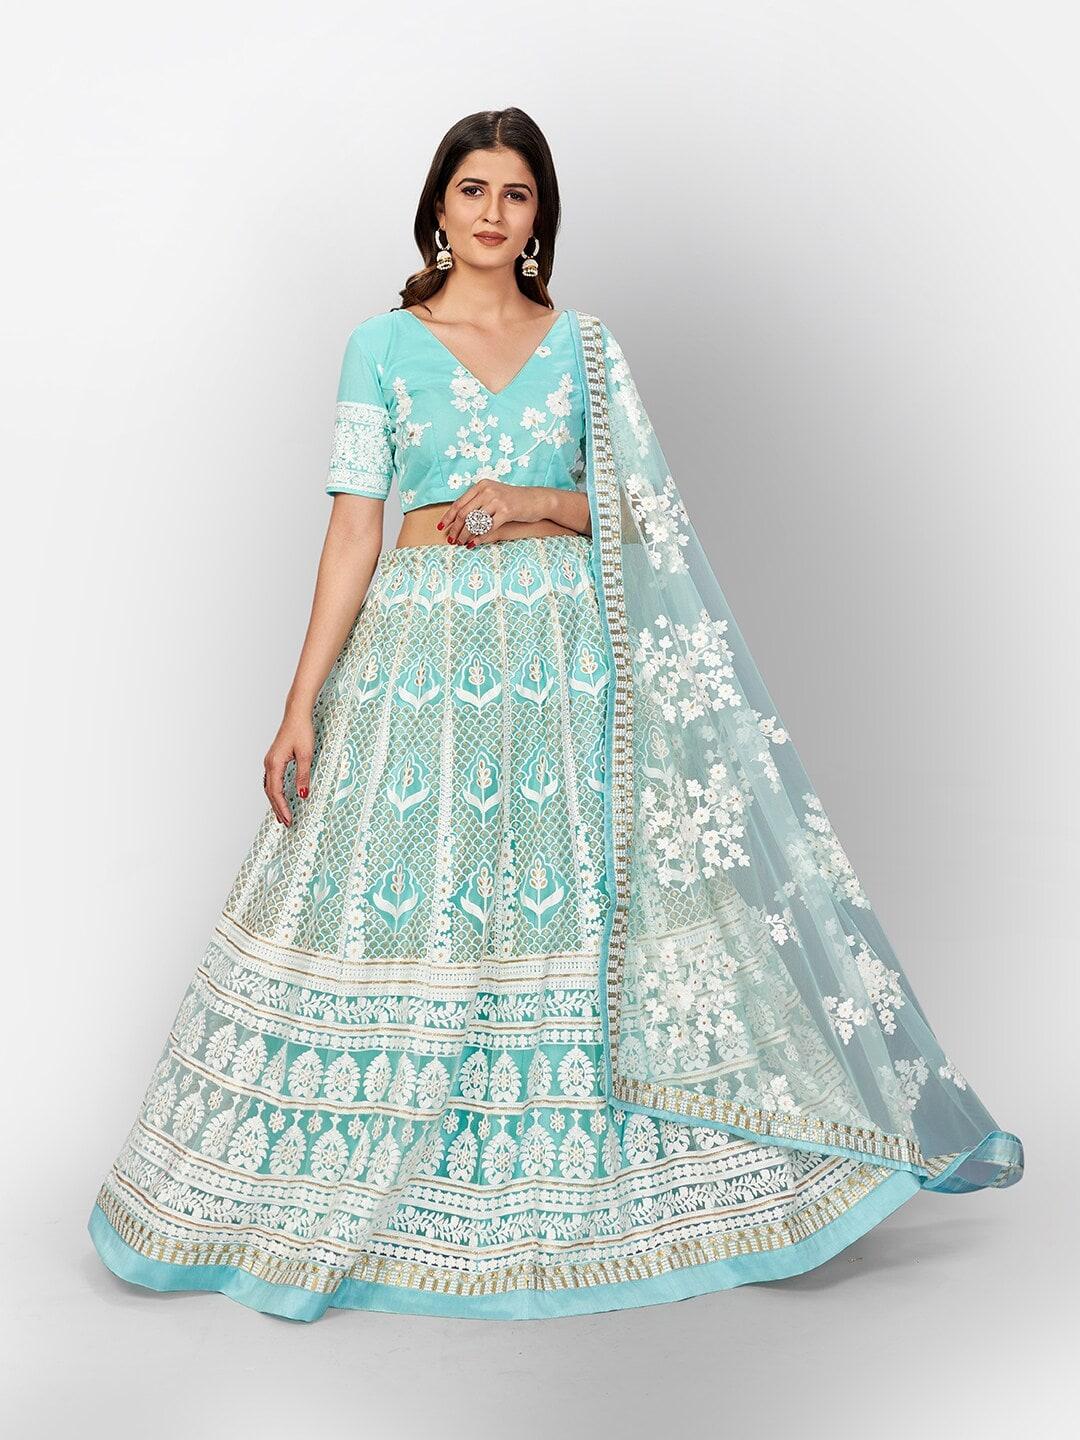 SHOPGARB Turquoise Blue & White Embroidered Thread Work Semi-Stitched Lehenga & Unstitched Blouse With